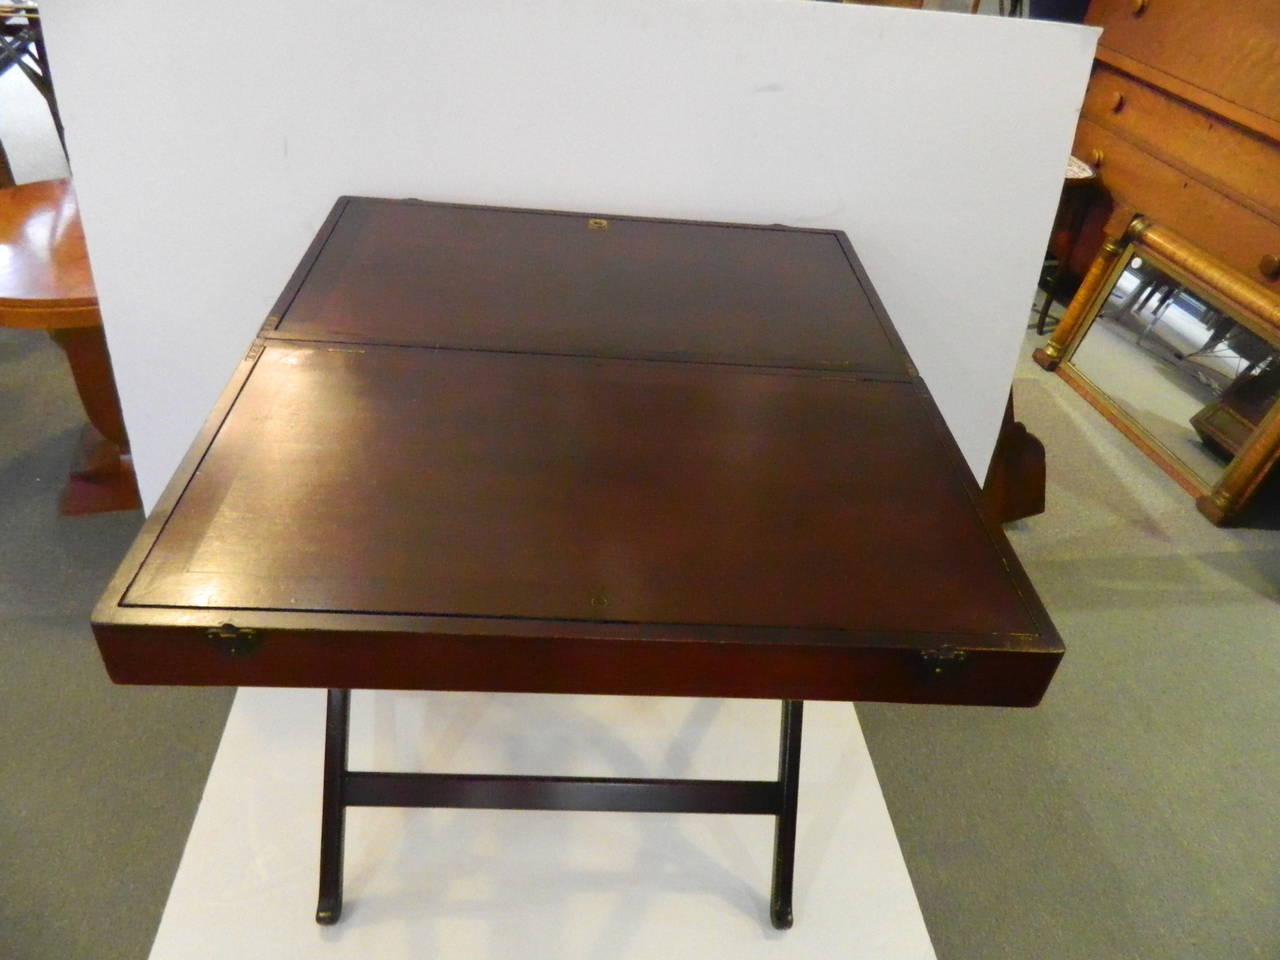 Antique mahogany folding desk with usable table top when opened. One side has a mirror and sectioned storage, the other a few sections. 
This desk is substantial enough to use as a table when opened.